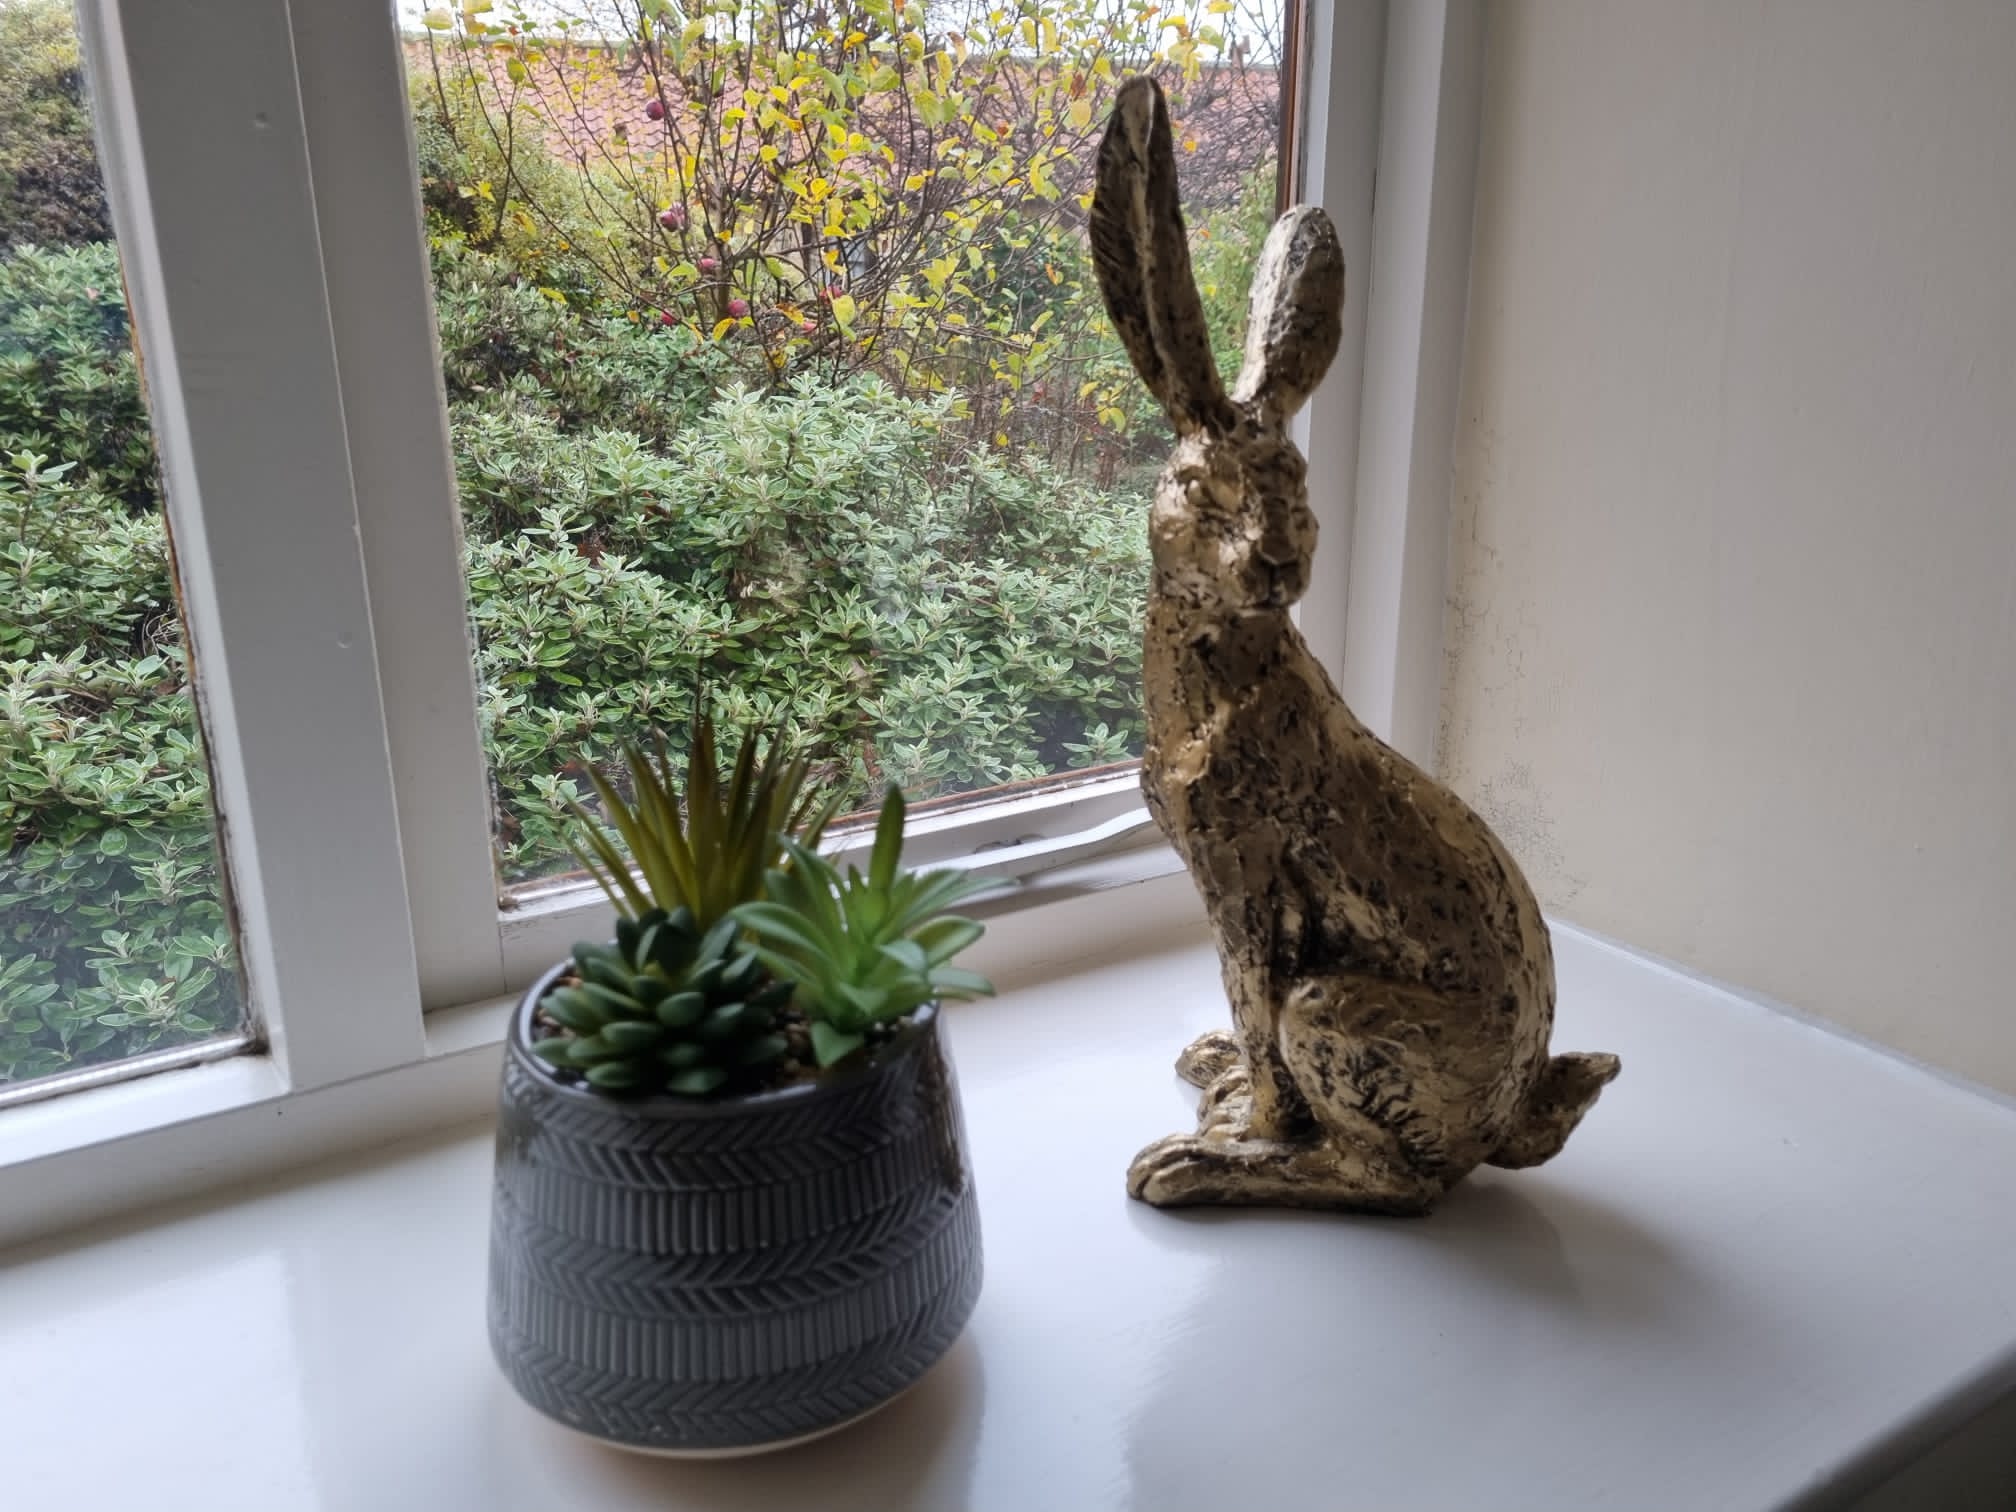 a statue of a hare in the window of Daleview cottage